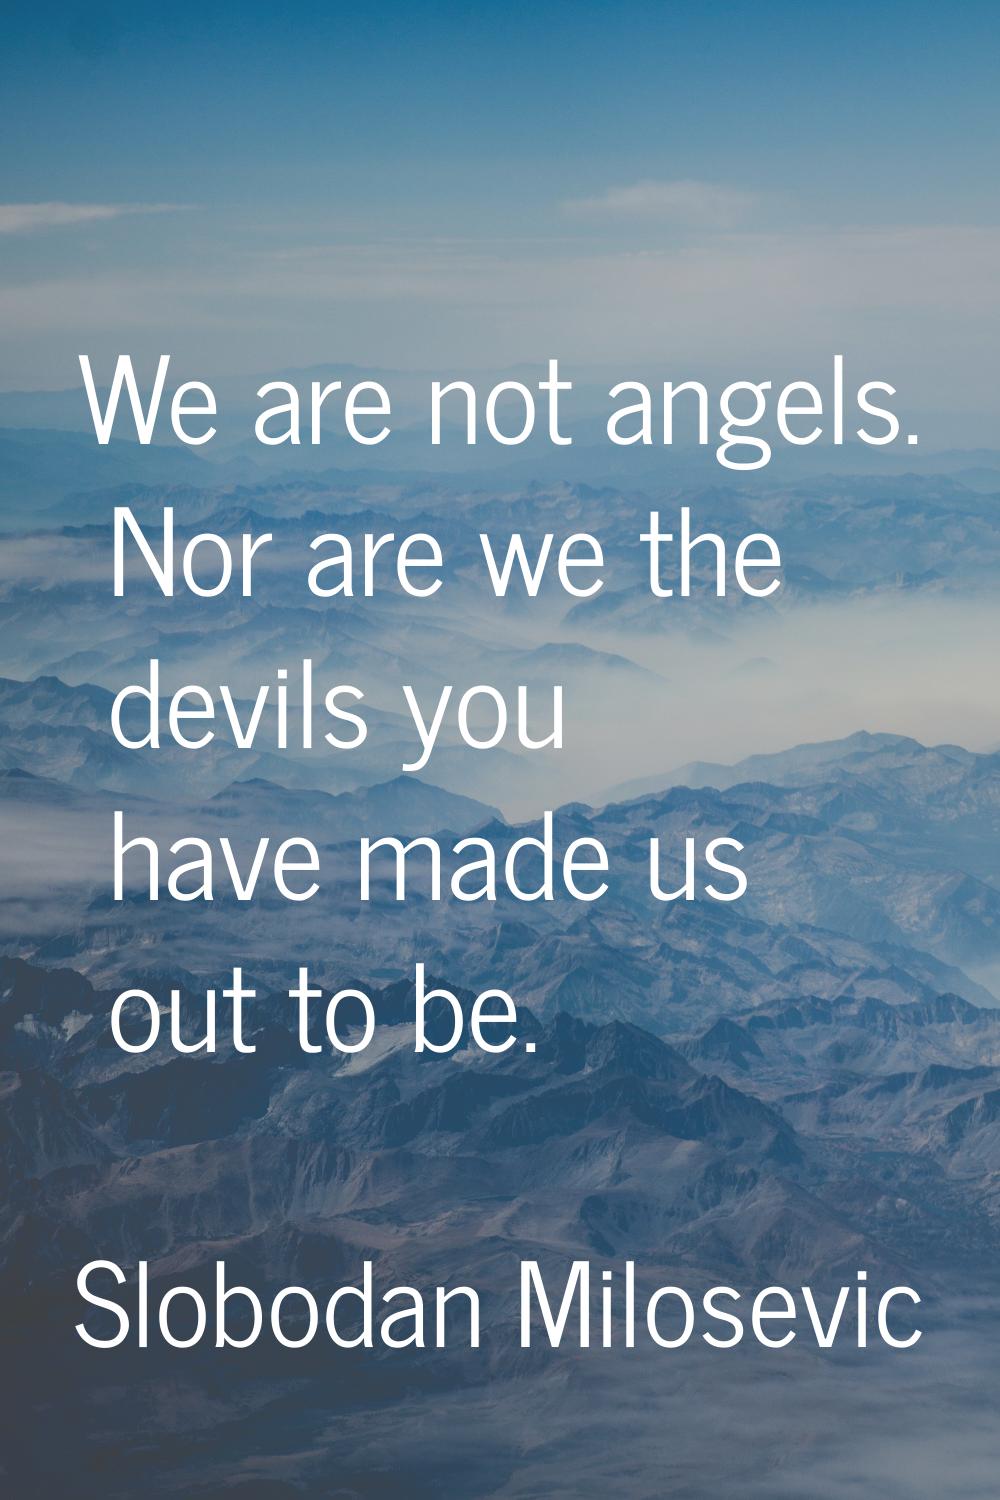 We are not angels. Nor are we the devils you have made us out to be.